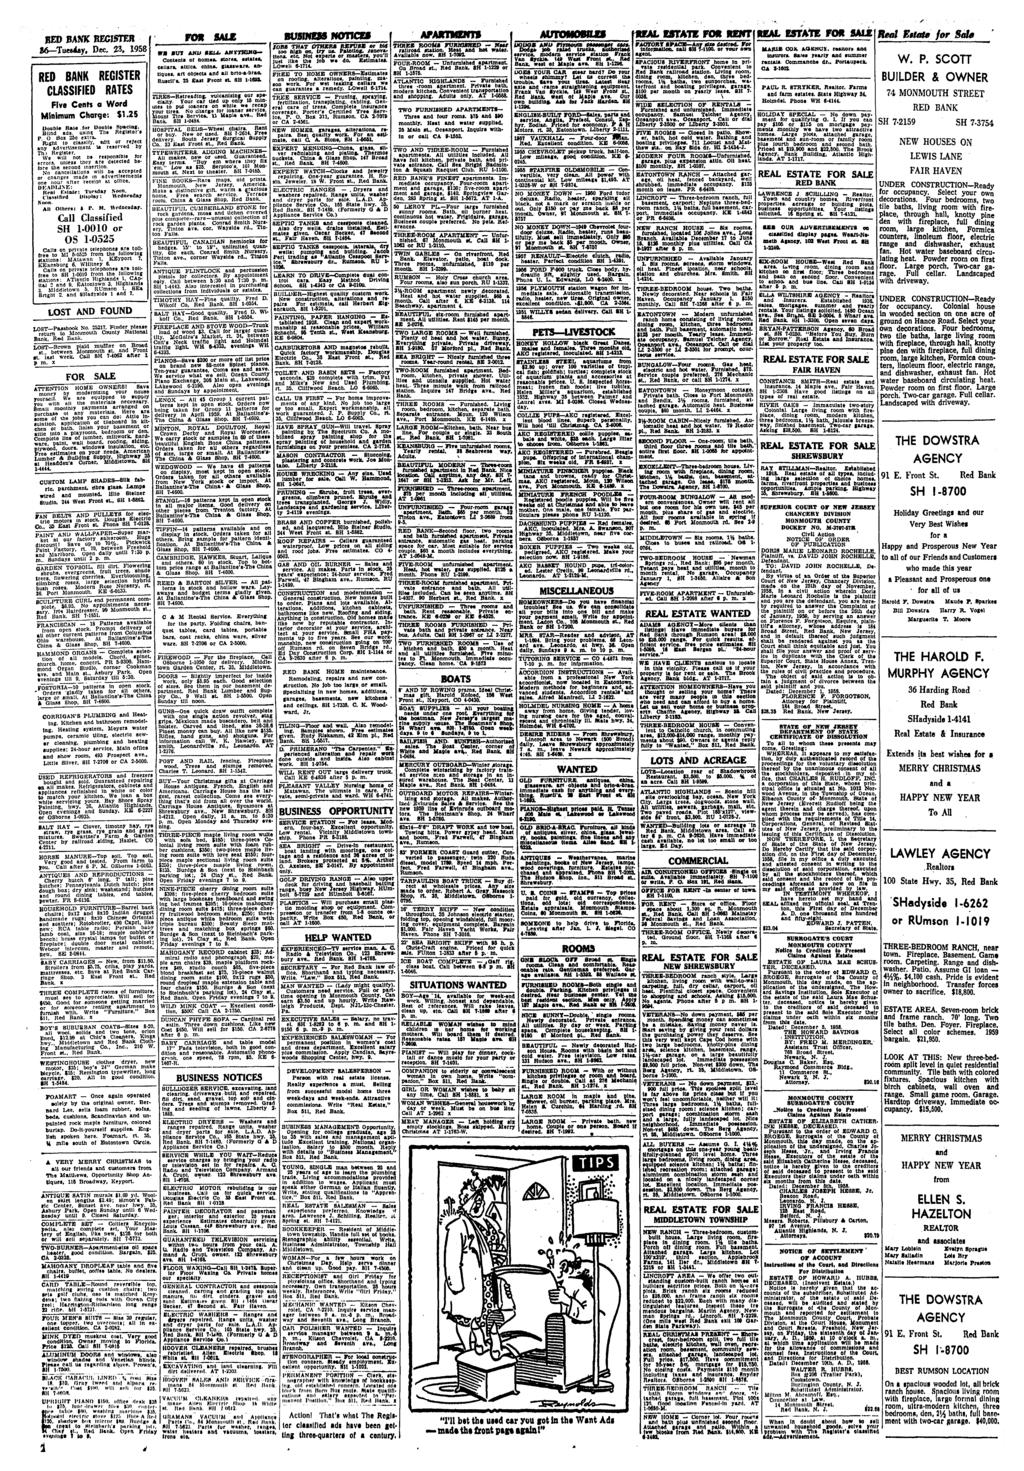 BED HANK REGISTER 86 Tuesday, Dec. 23, 1958 REGISTER CLASSIFIED RATES Five Cenrs a Word Minimum Charge: $1.25 edit or reject * 1* reserved by Double Rale for Double Spacing. Blind ads.